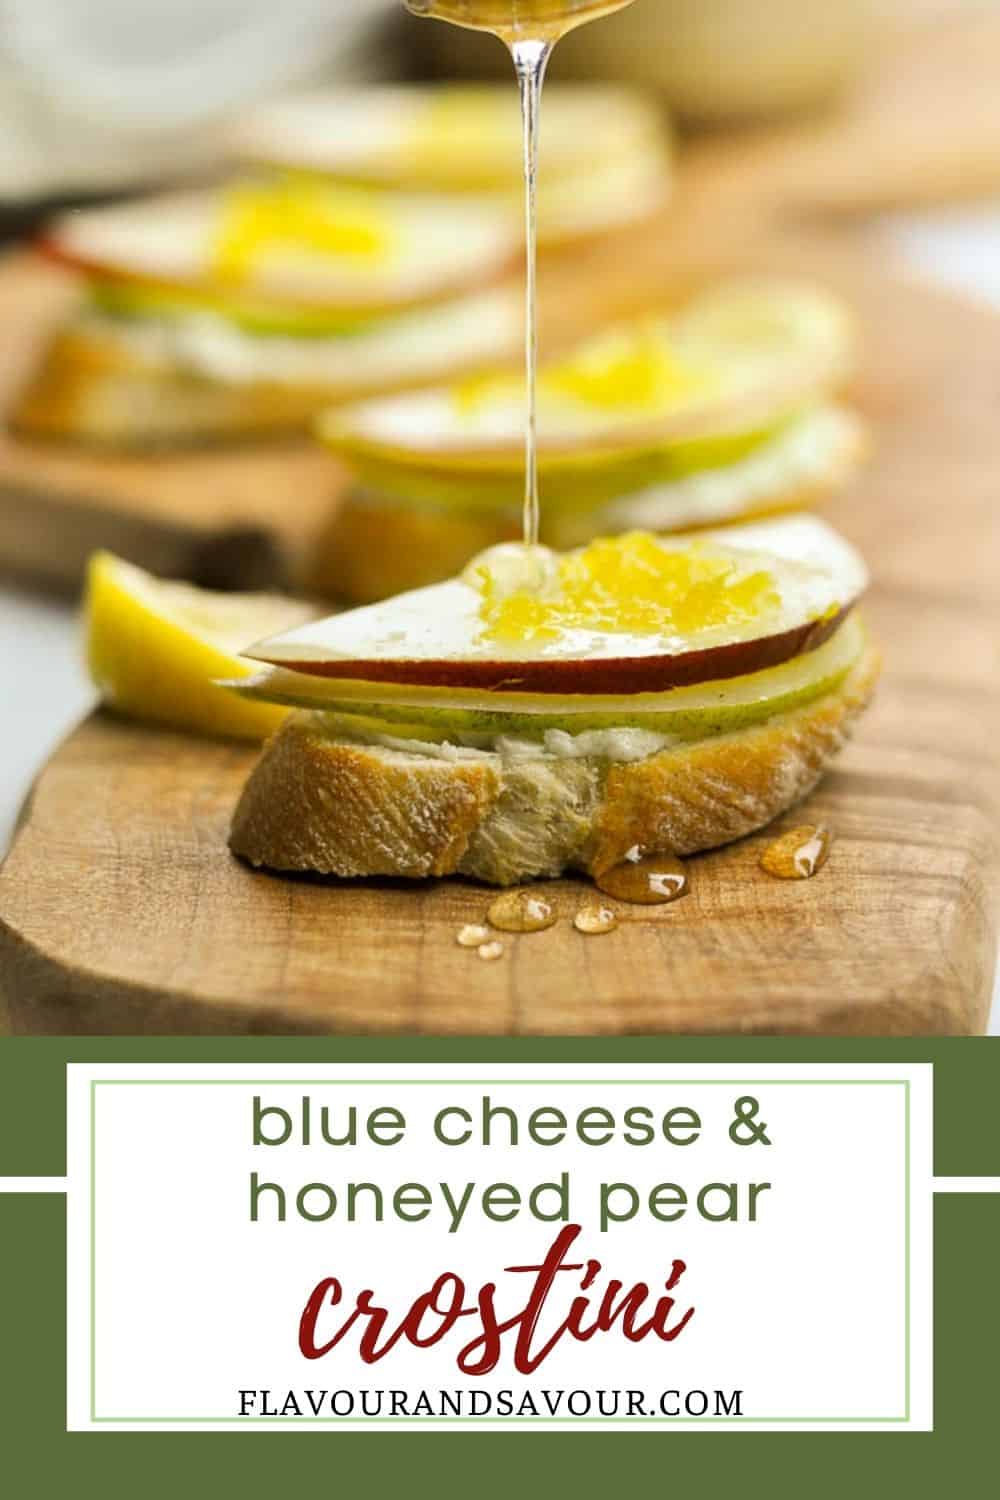 image and text for blue cheese and honeyed pear crostini